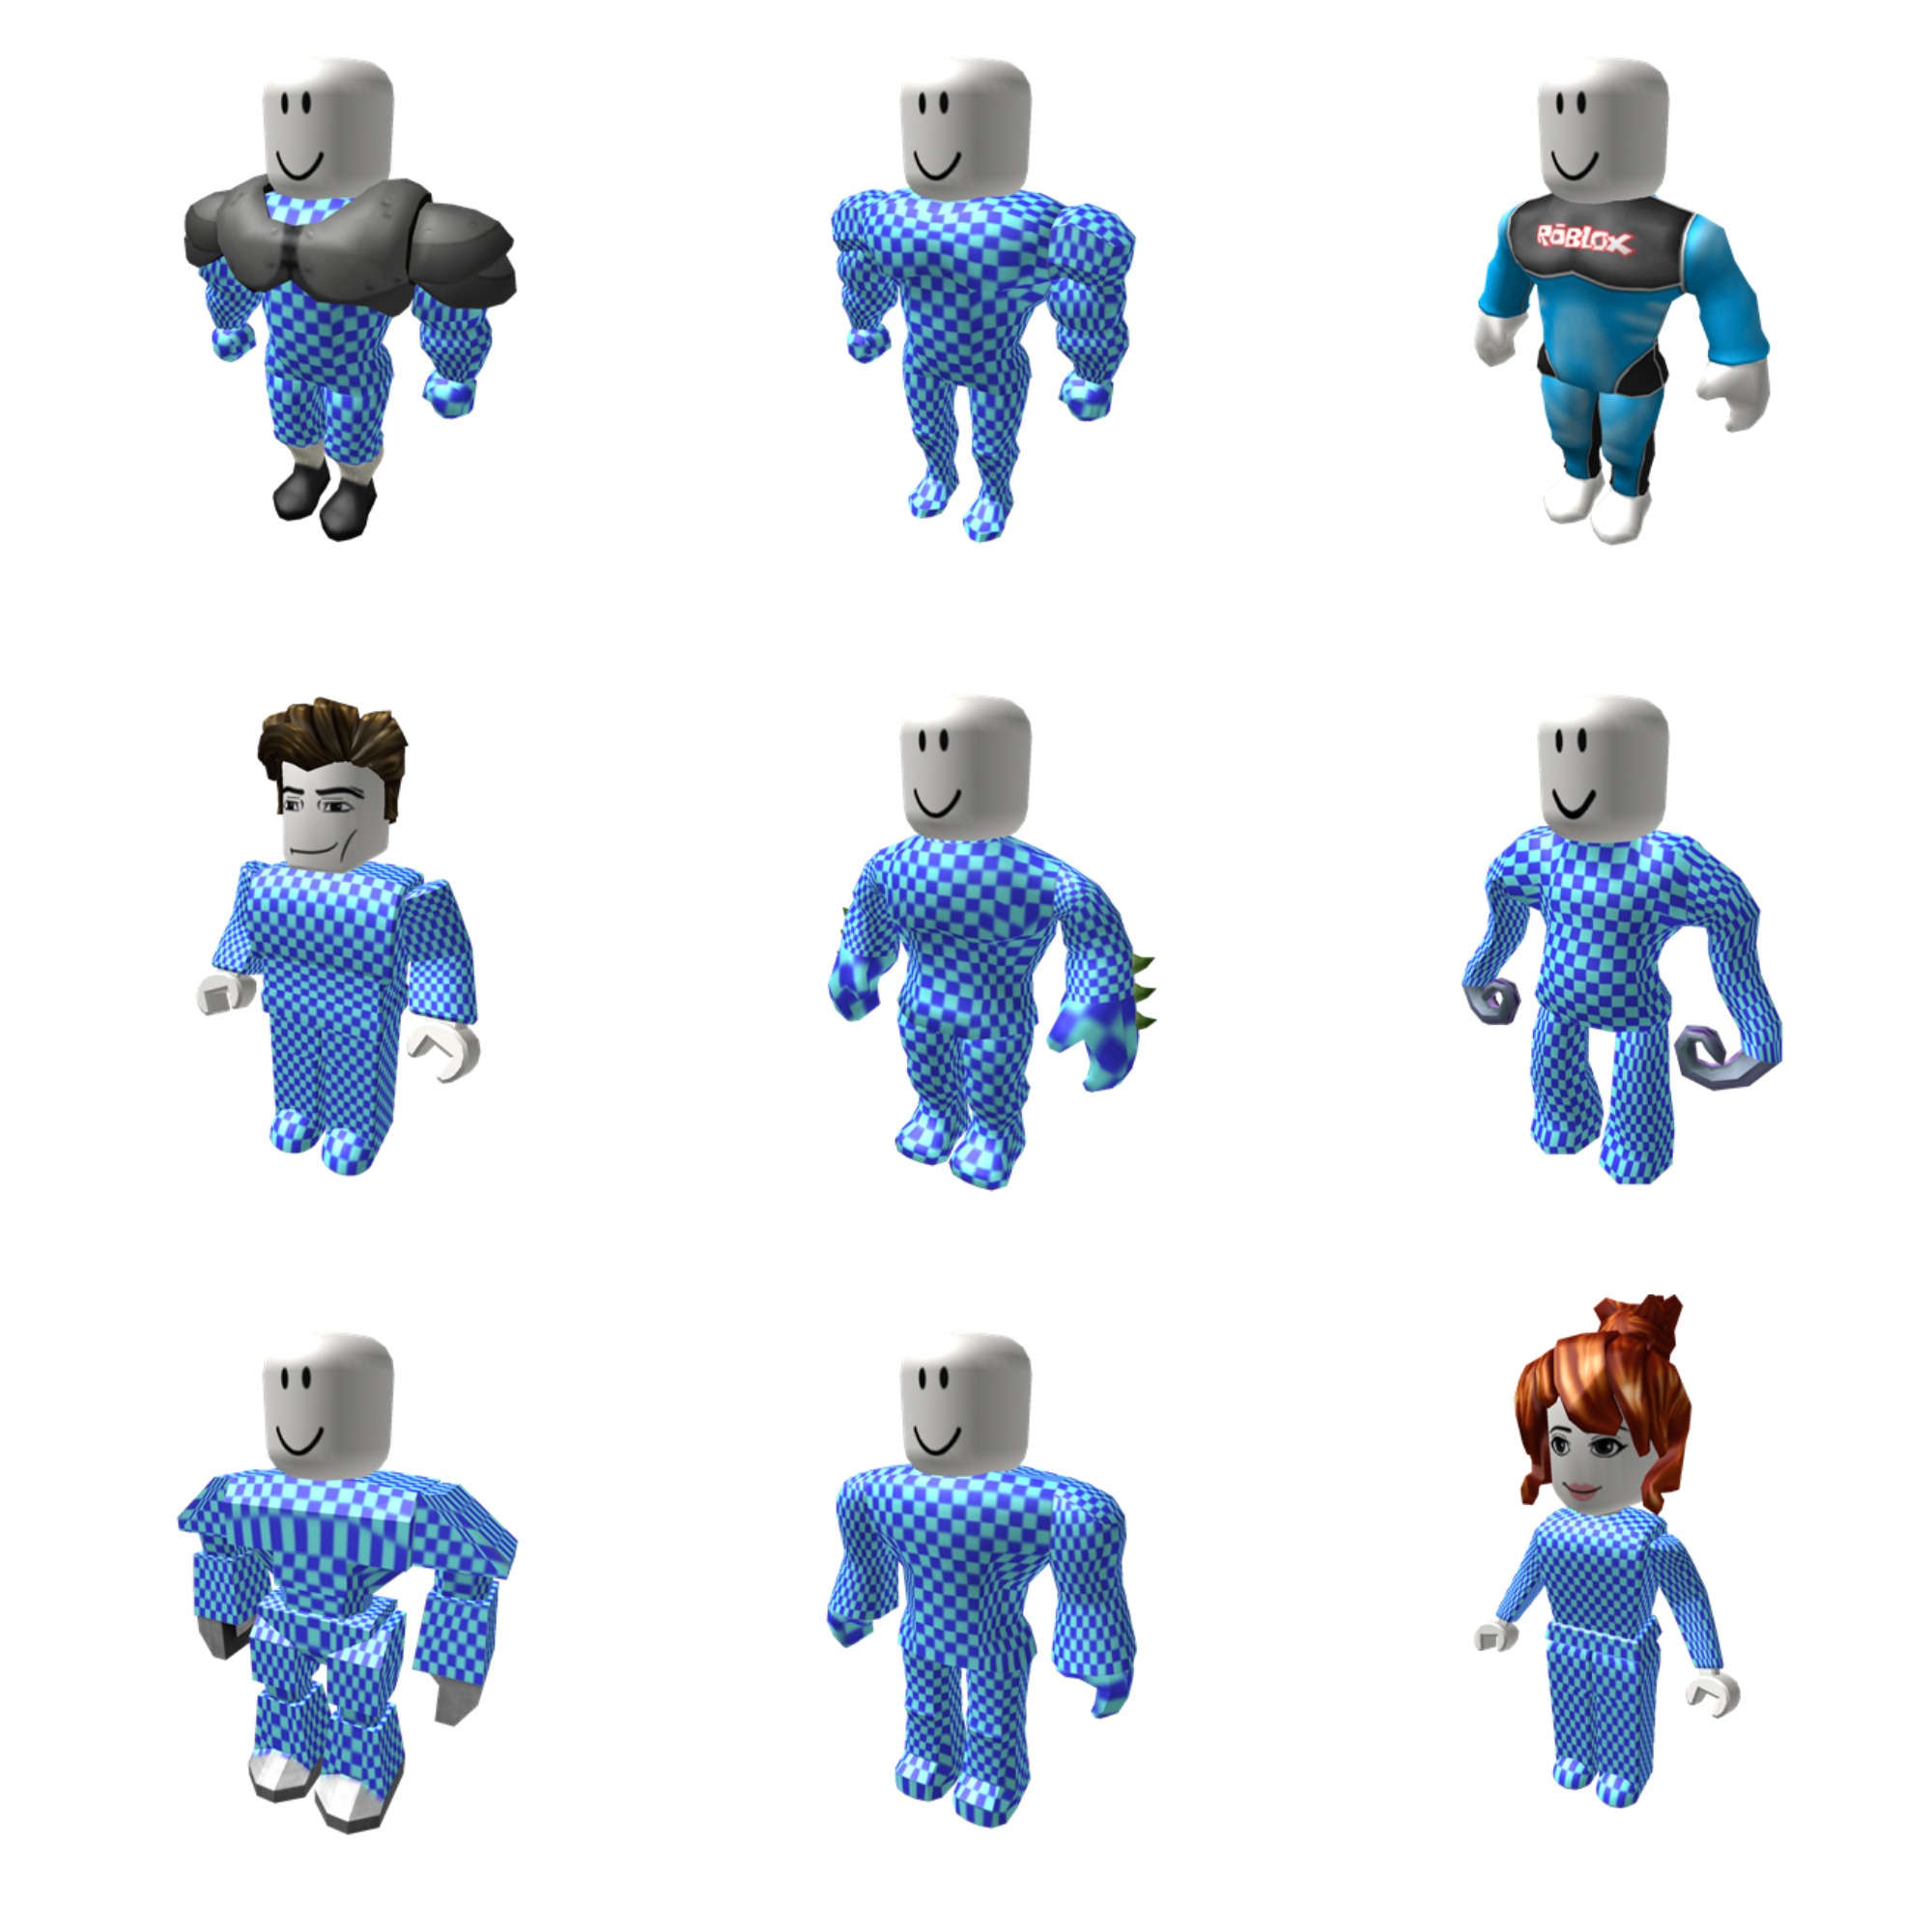 what is roblox